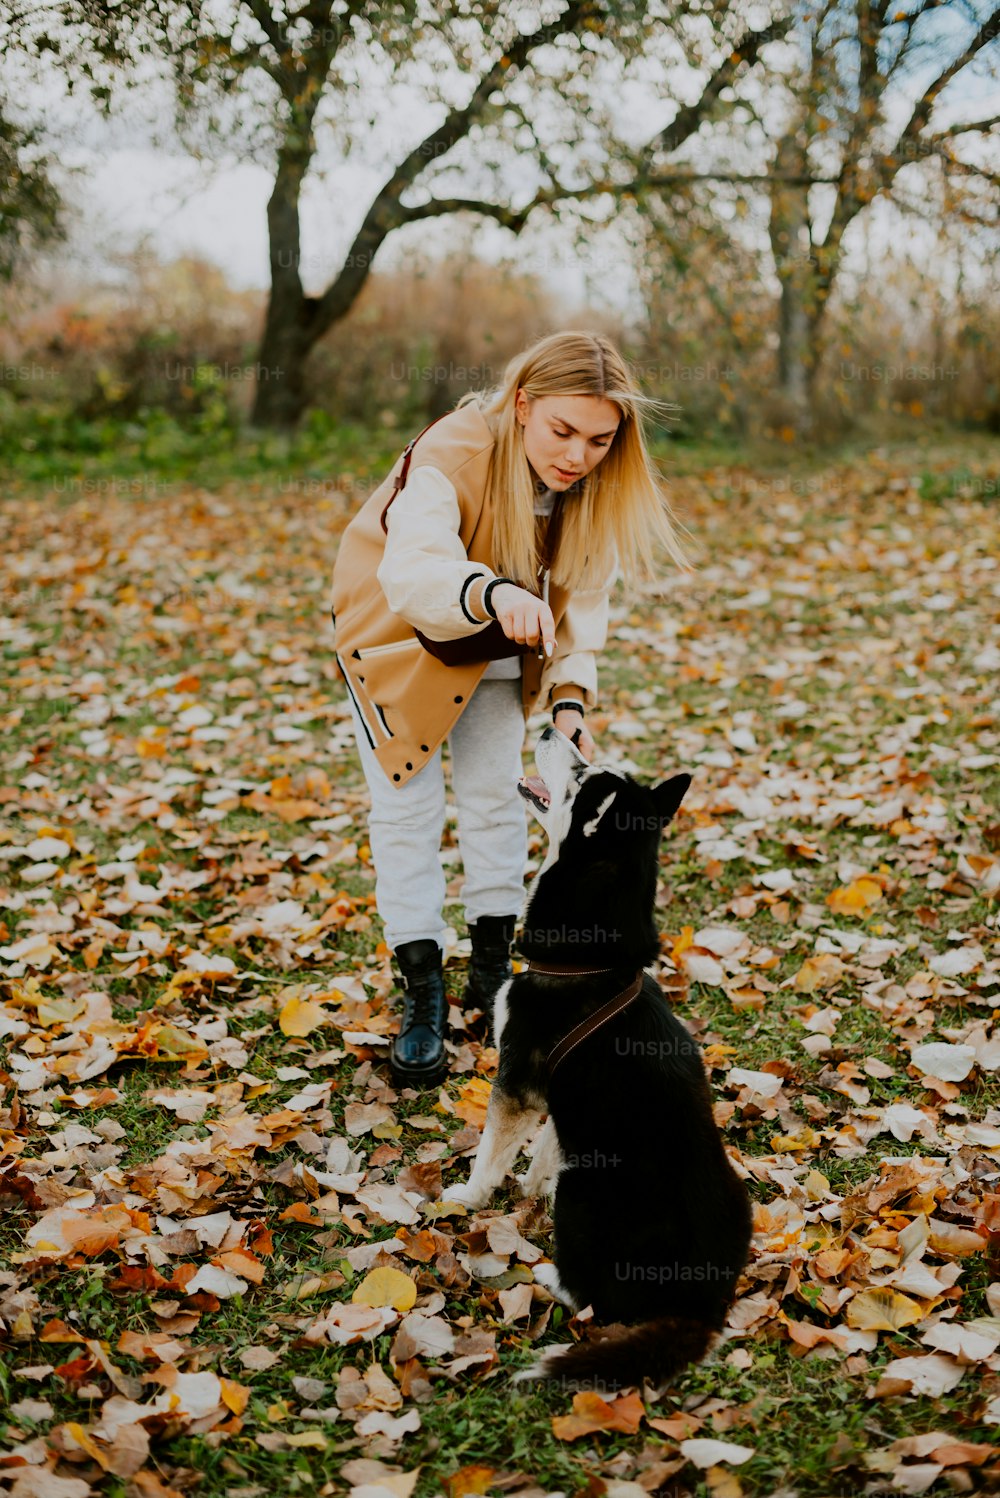 a woman petting a dog in a field of leaves